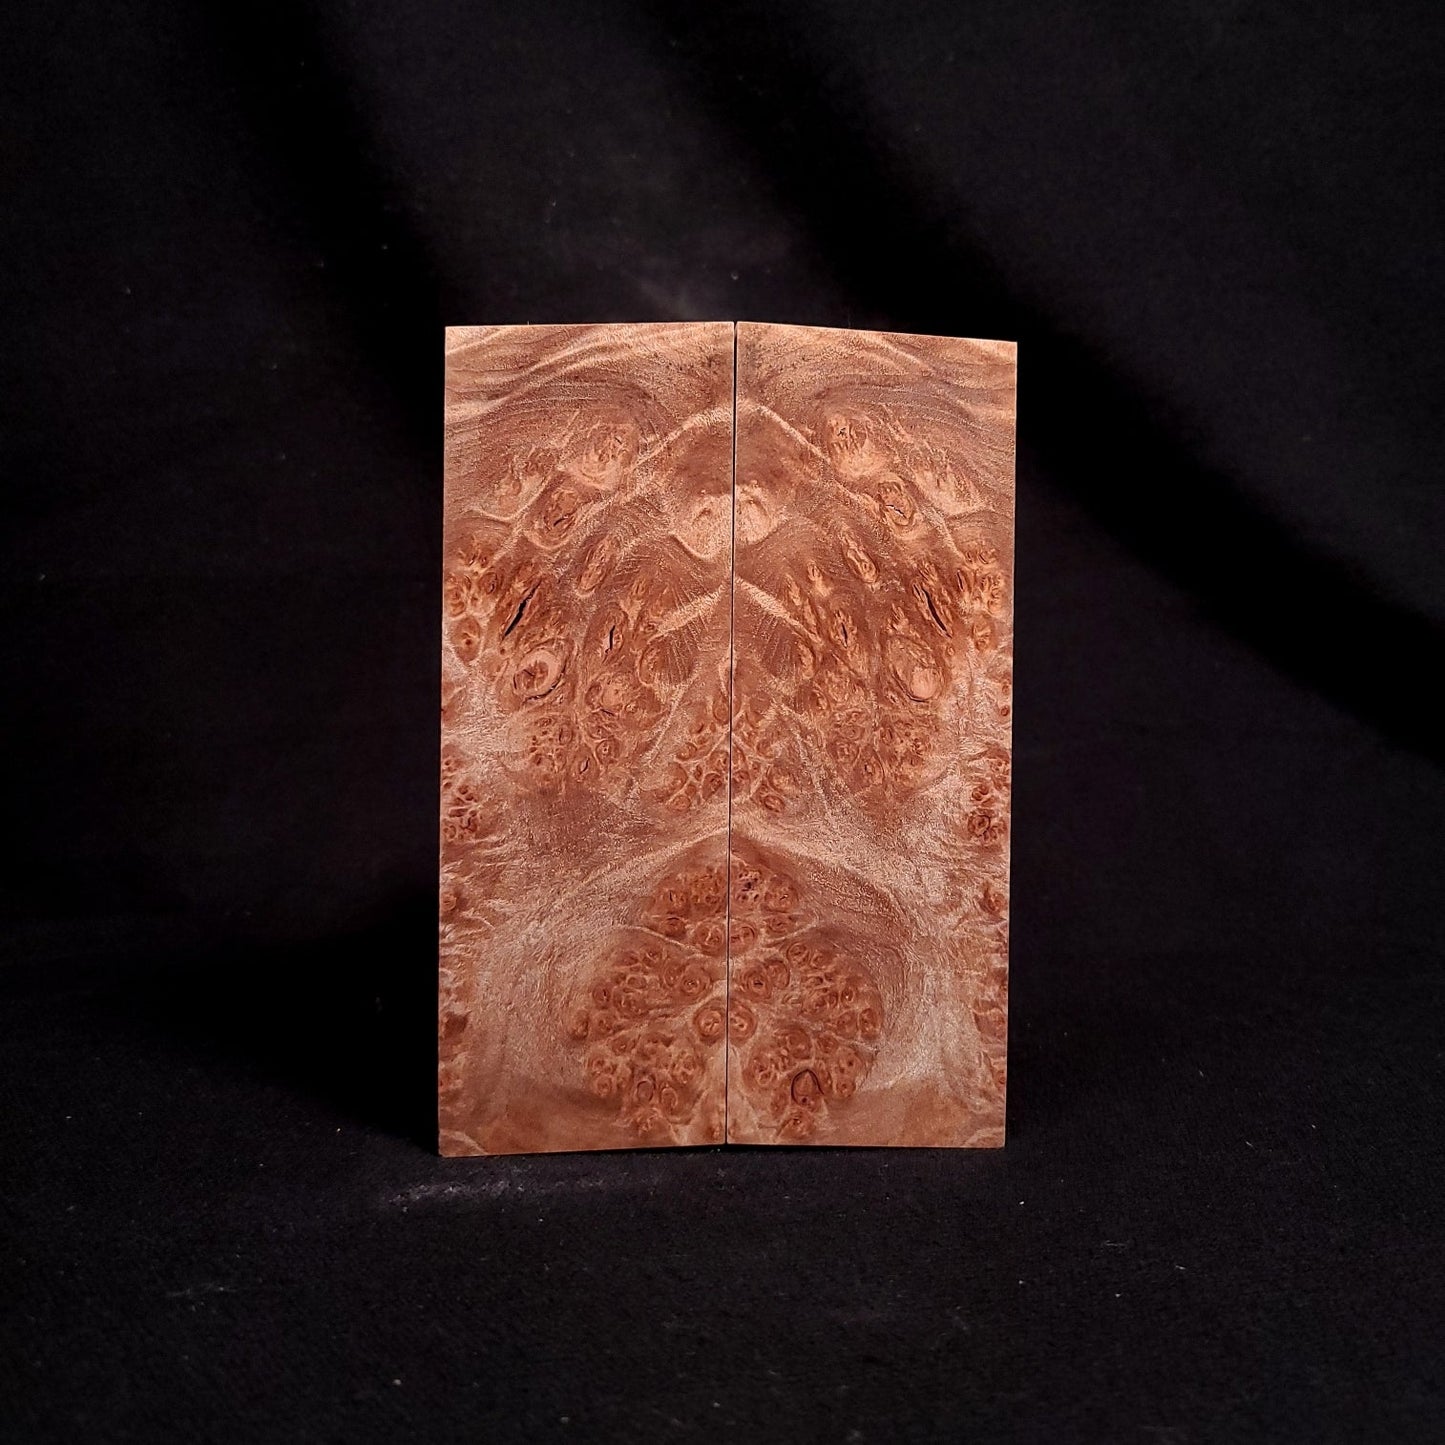 #2019 - Maple Burl - K&G Stabilized - RockSolid Scales -